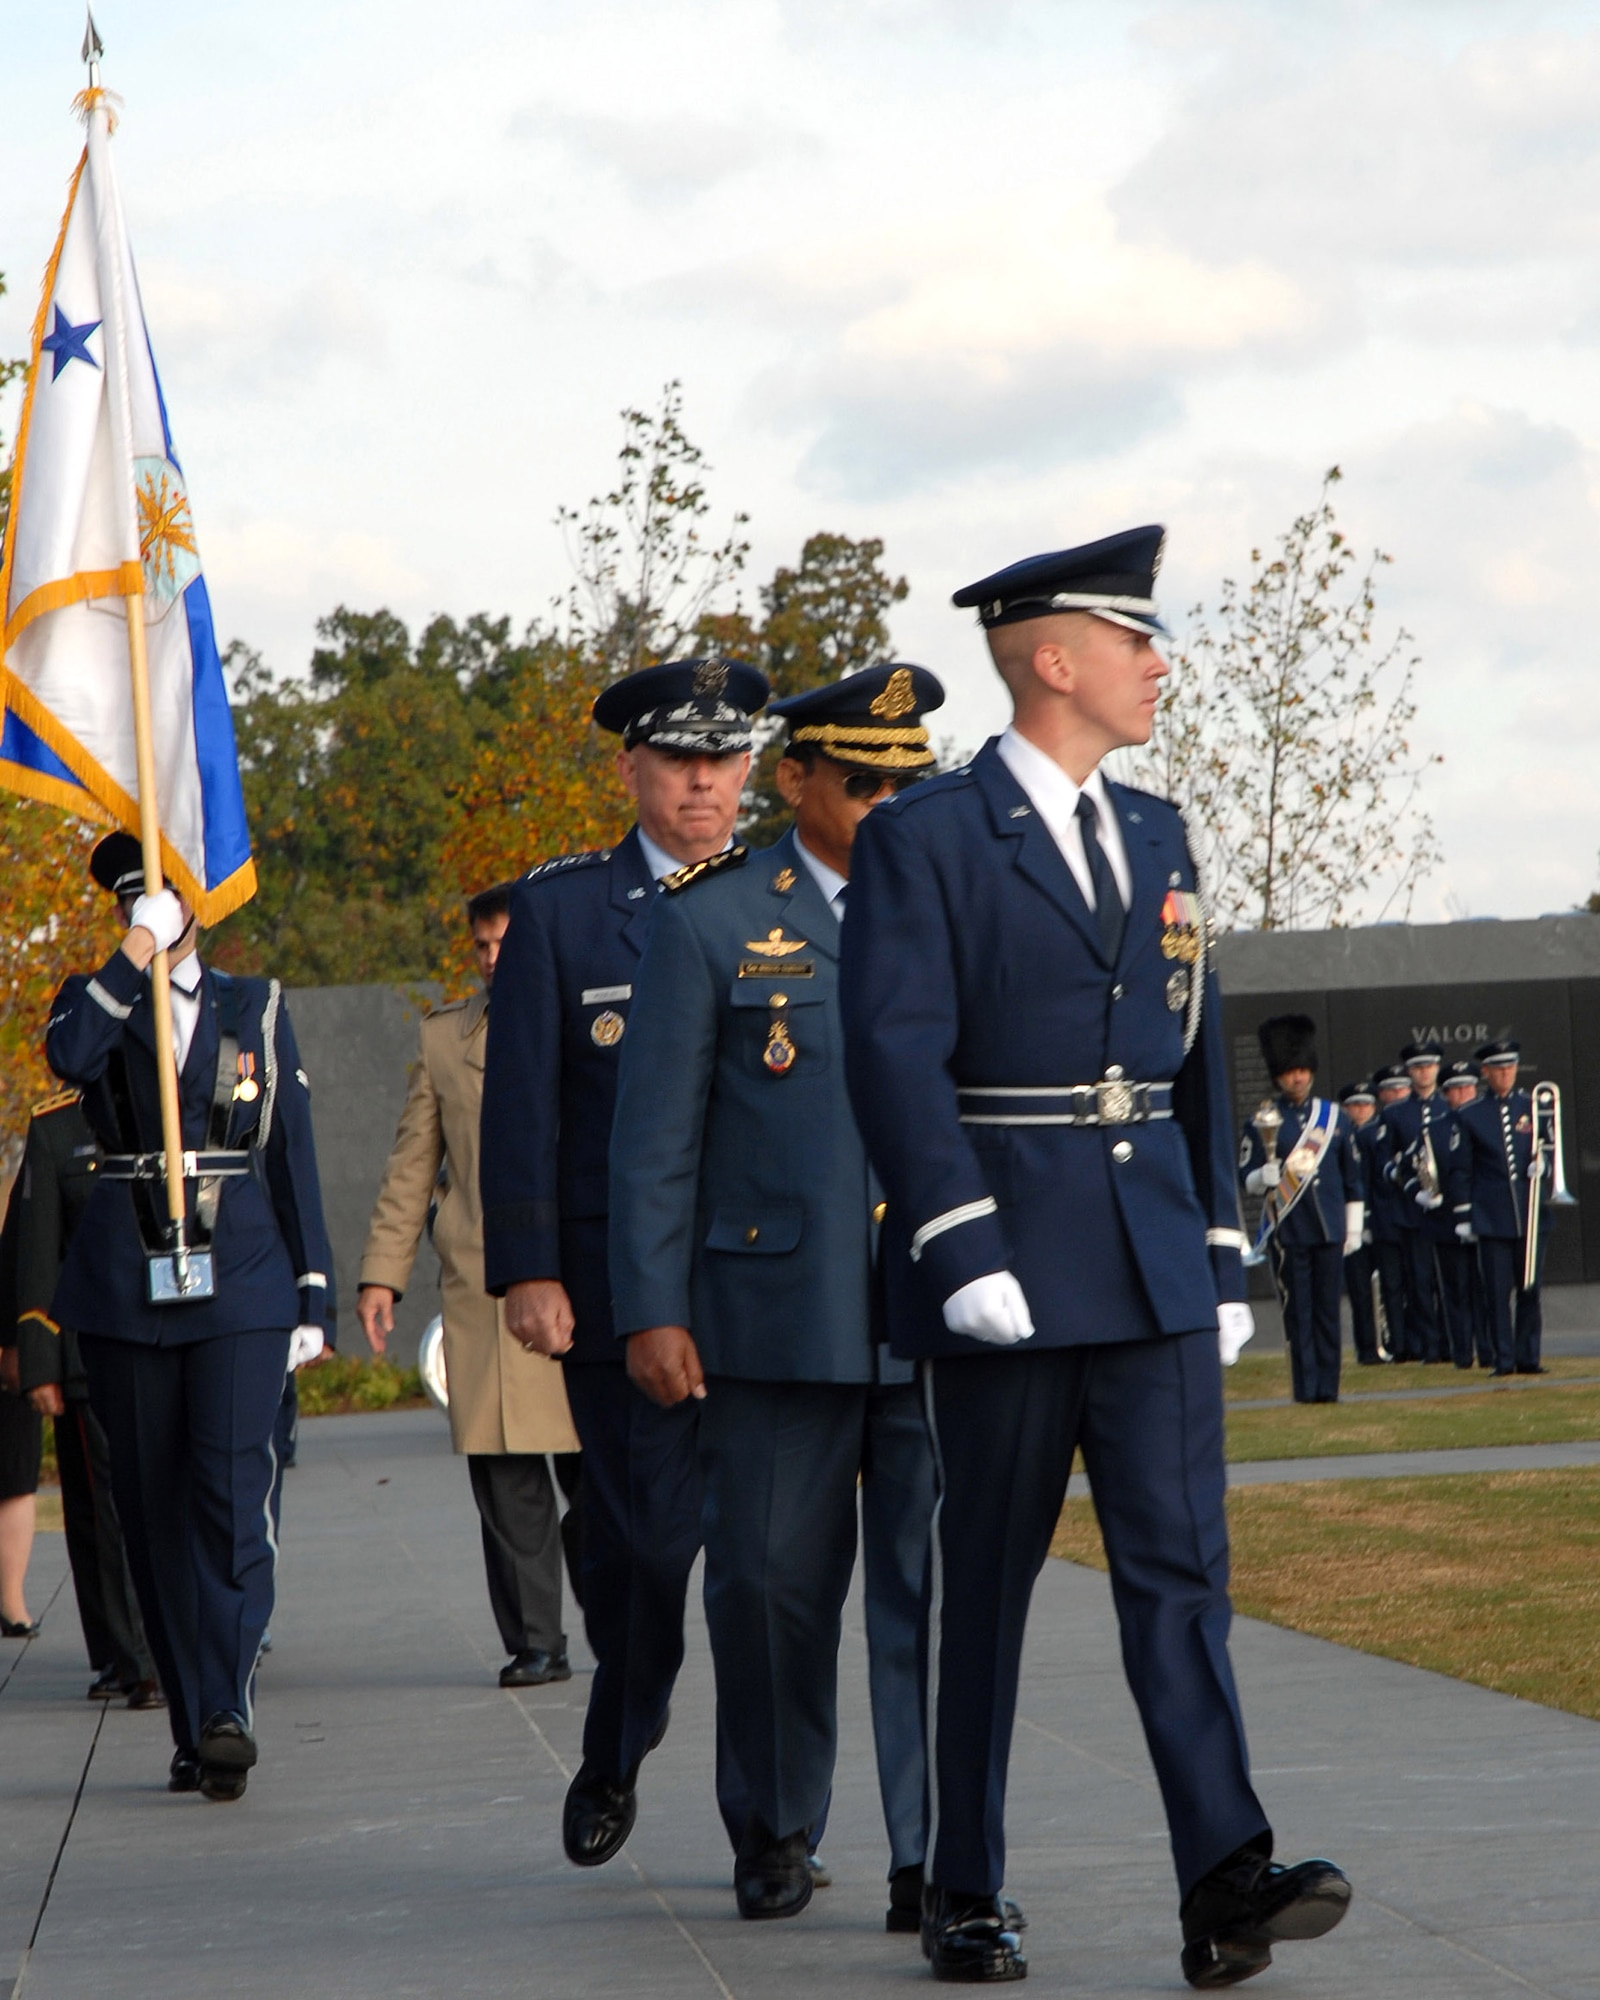 1st Lt. John Shirley from the Air Force Honor Guard leads Chief of Staff of the Air Force Gen. T. Michael Moseley and Lt. Gen. Soeung Samnang, Cambodian Royal Air Force commander, to the wreath during a foreign dignitary arrival and wreath laying ceremony Tuesday, Oct. 24, 2006, at the Air Force Memorial. (U.S. Air Force photo/Staff Sgt. Madelyn Waychoff)